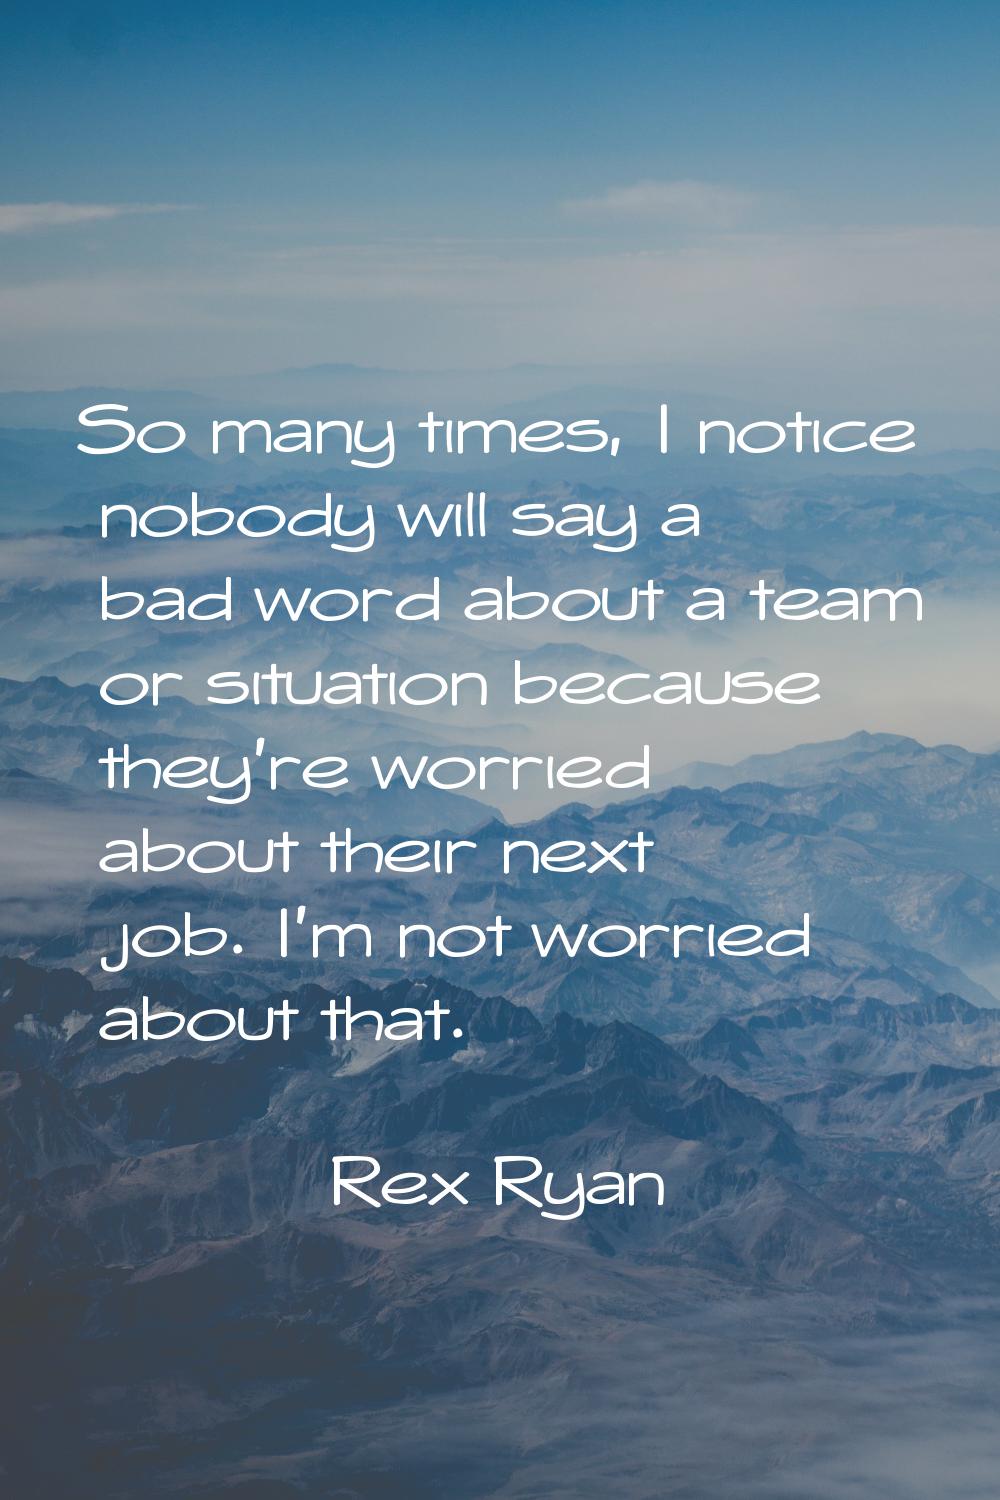 So many times, I notice nobody will say a bad word about a team or situation because they're worrie